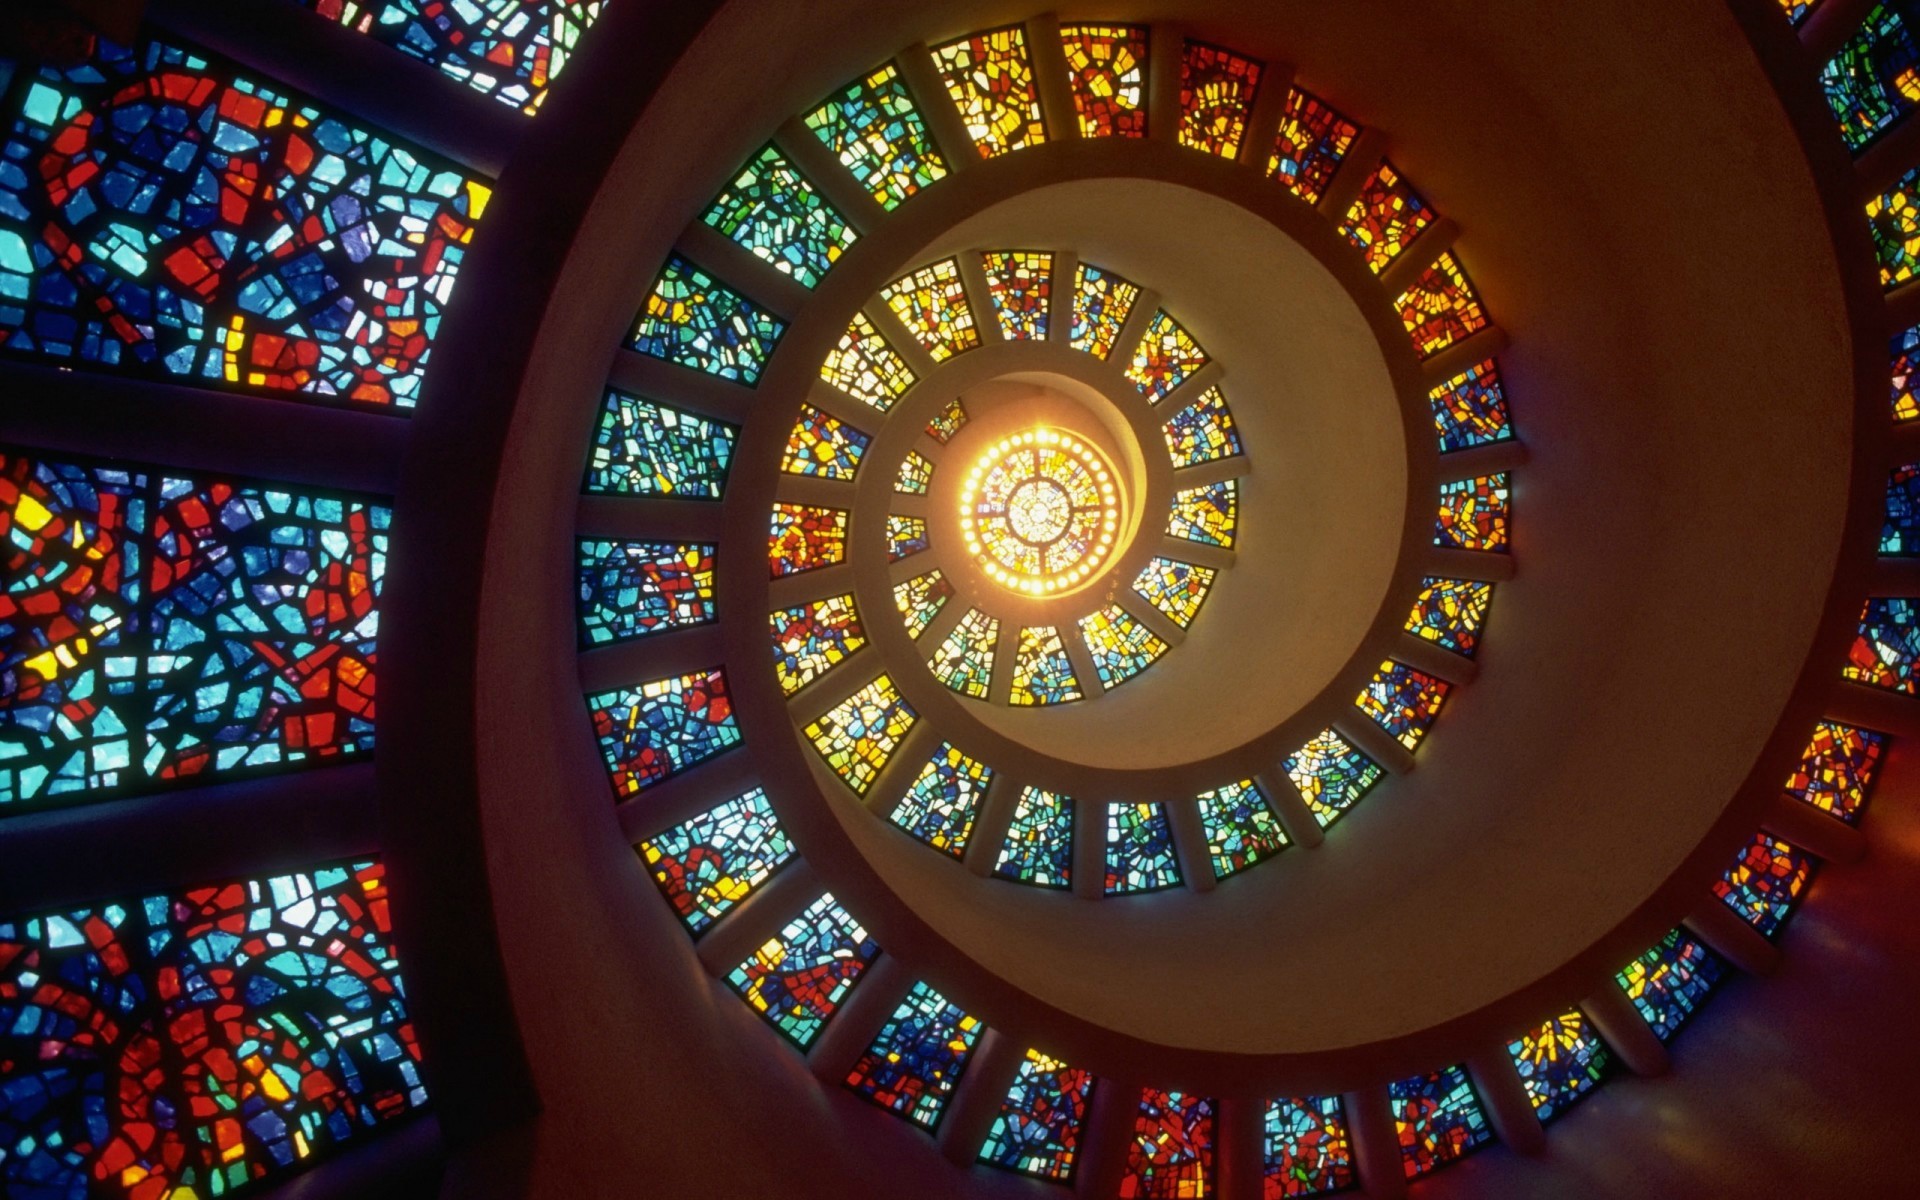 Stained Glass Colorful Building Spiral Dallas Wallpaper:1920x1200